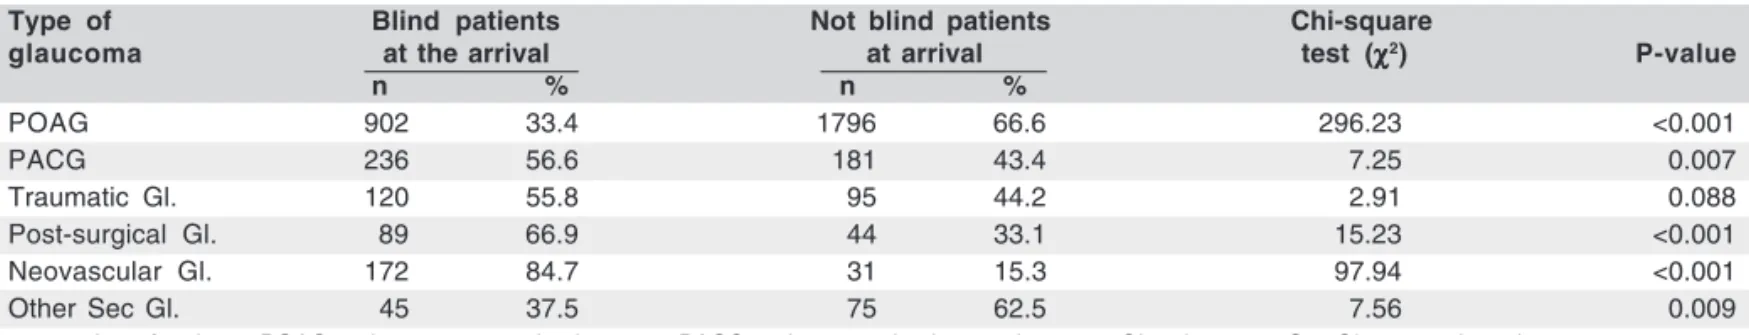 Table 3. Number of blind and not blind glaucomatous patients at the arrival in the Glaucoma Service of the São Geraldo Hospital from 1959 to 2006